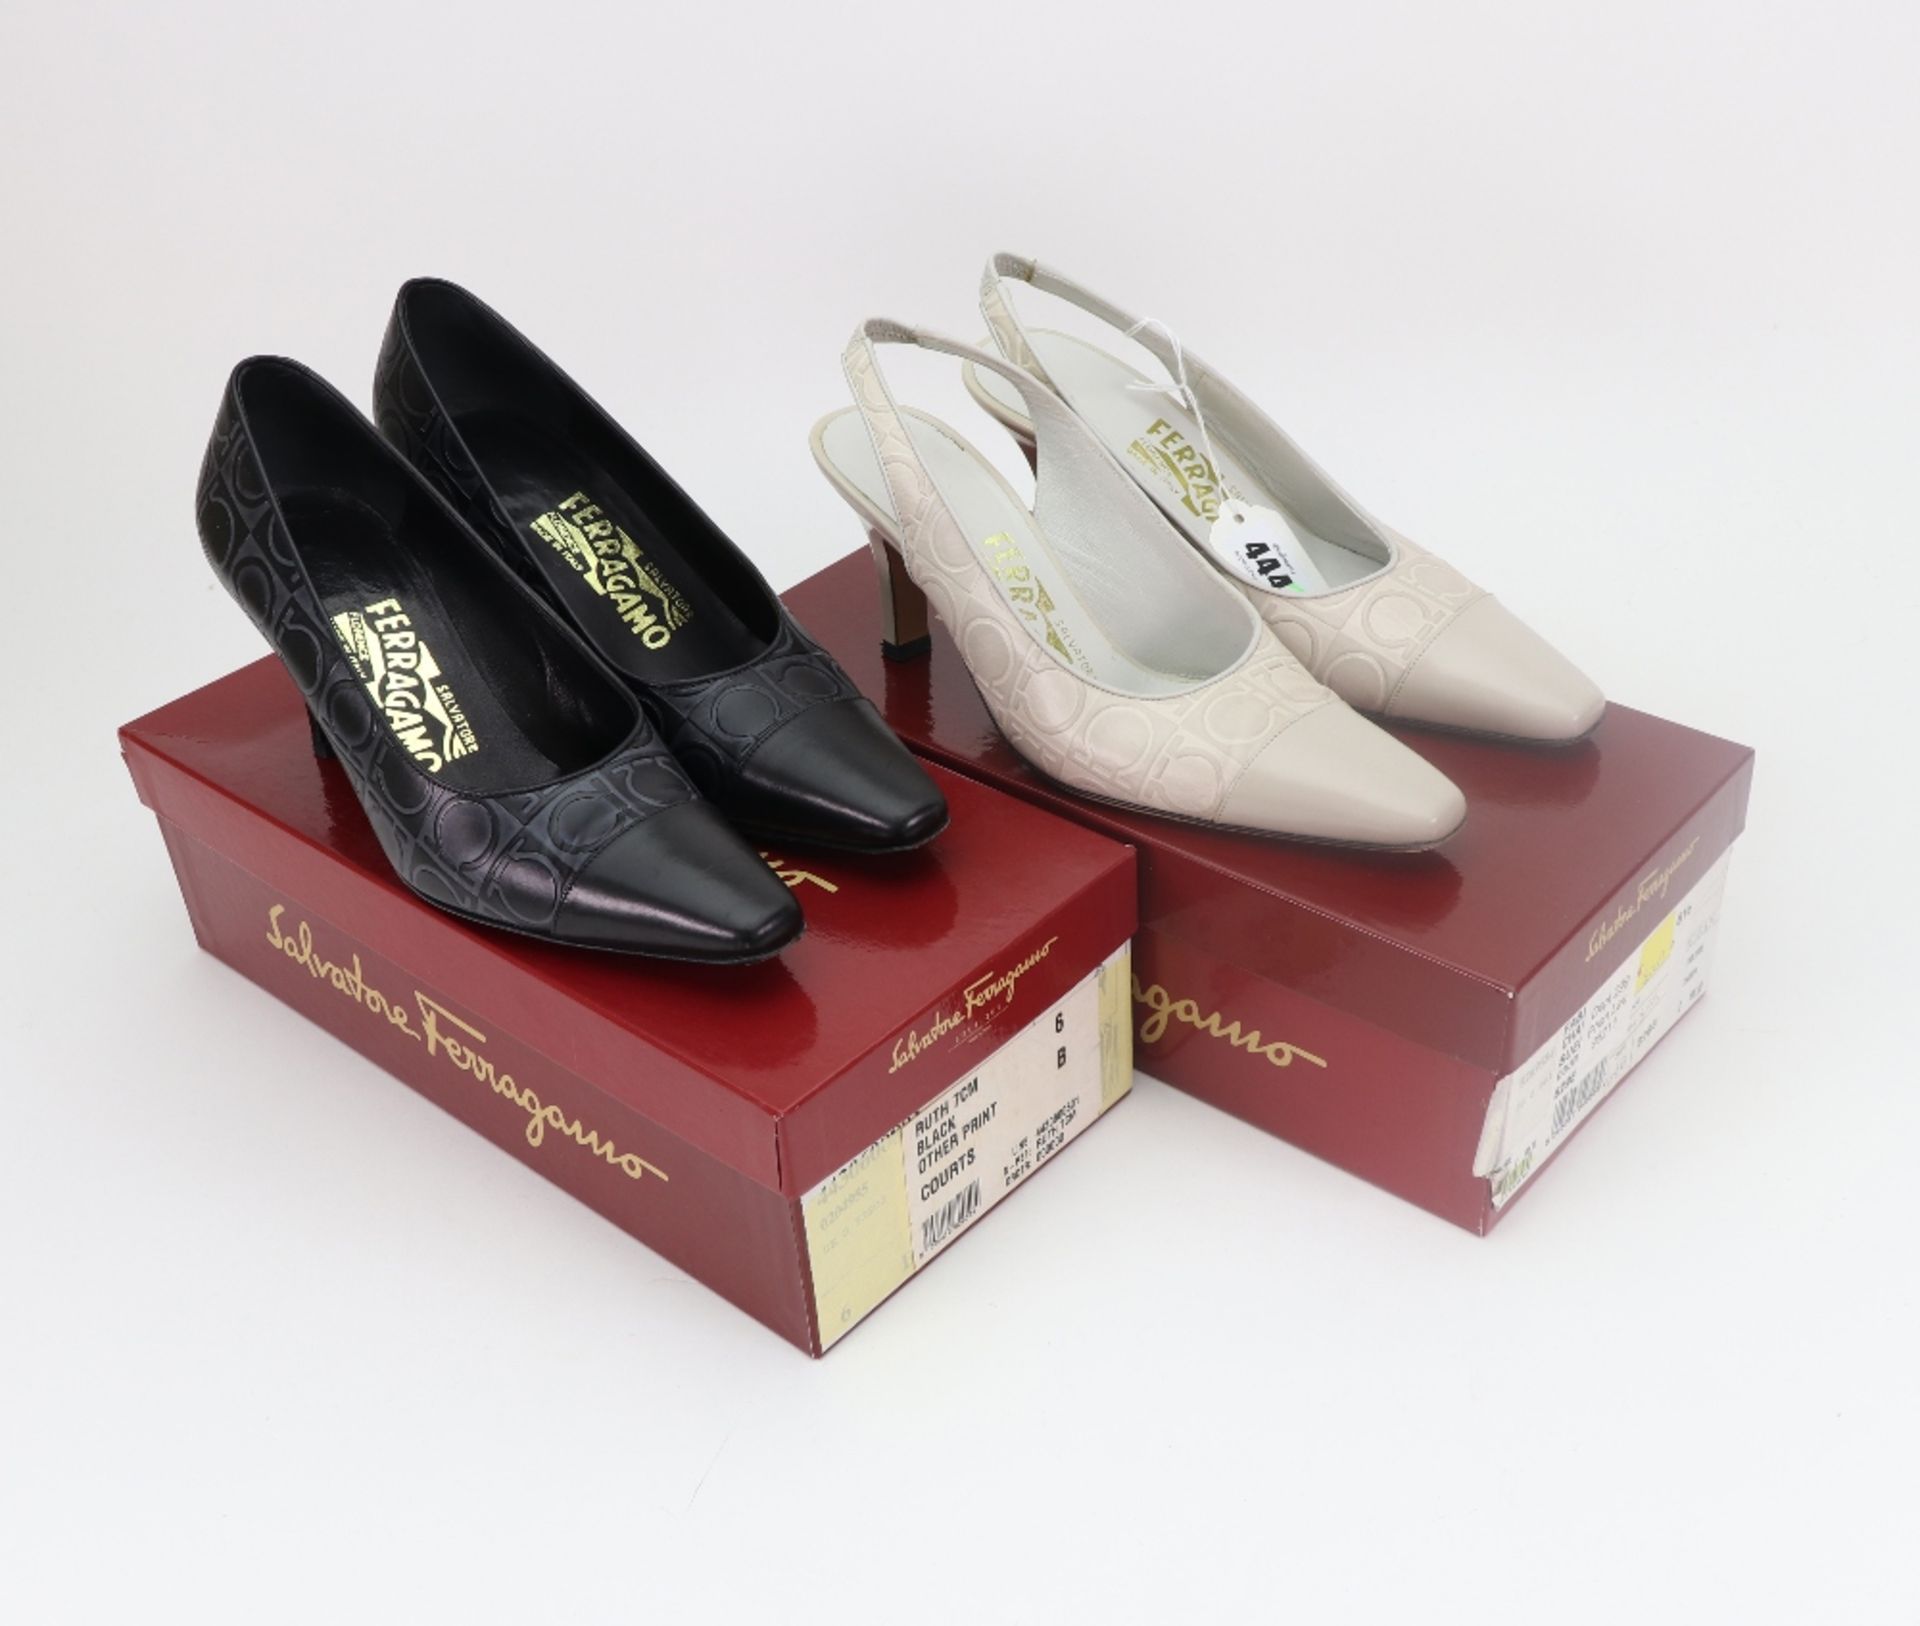 A Pair of black Ferragamo shoes, size 4 approx and a pair of cream slingback shoes,